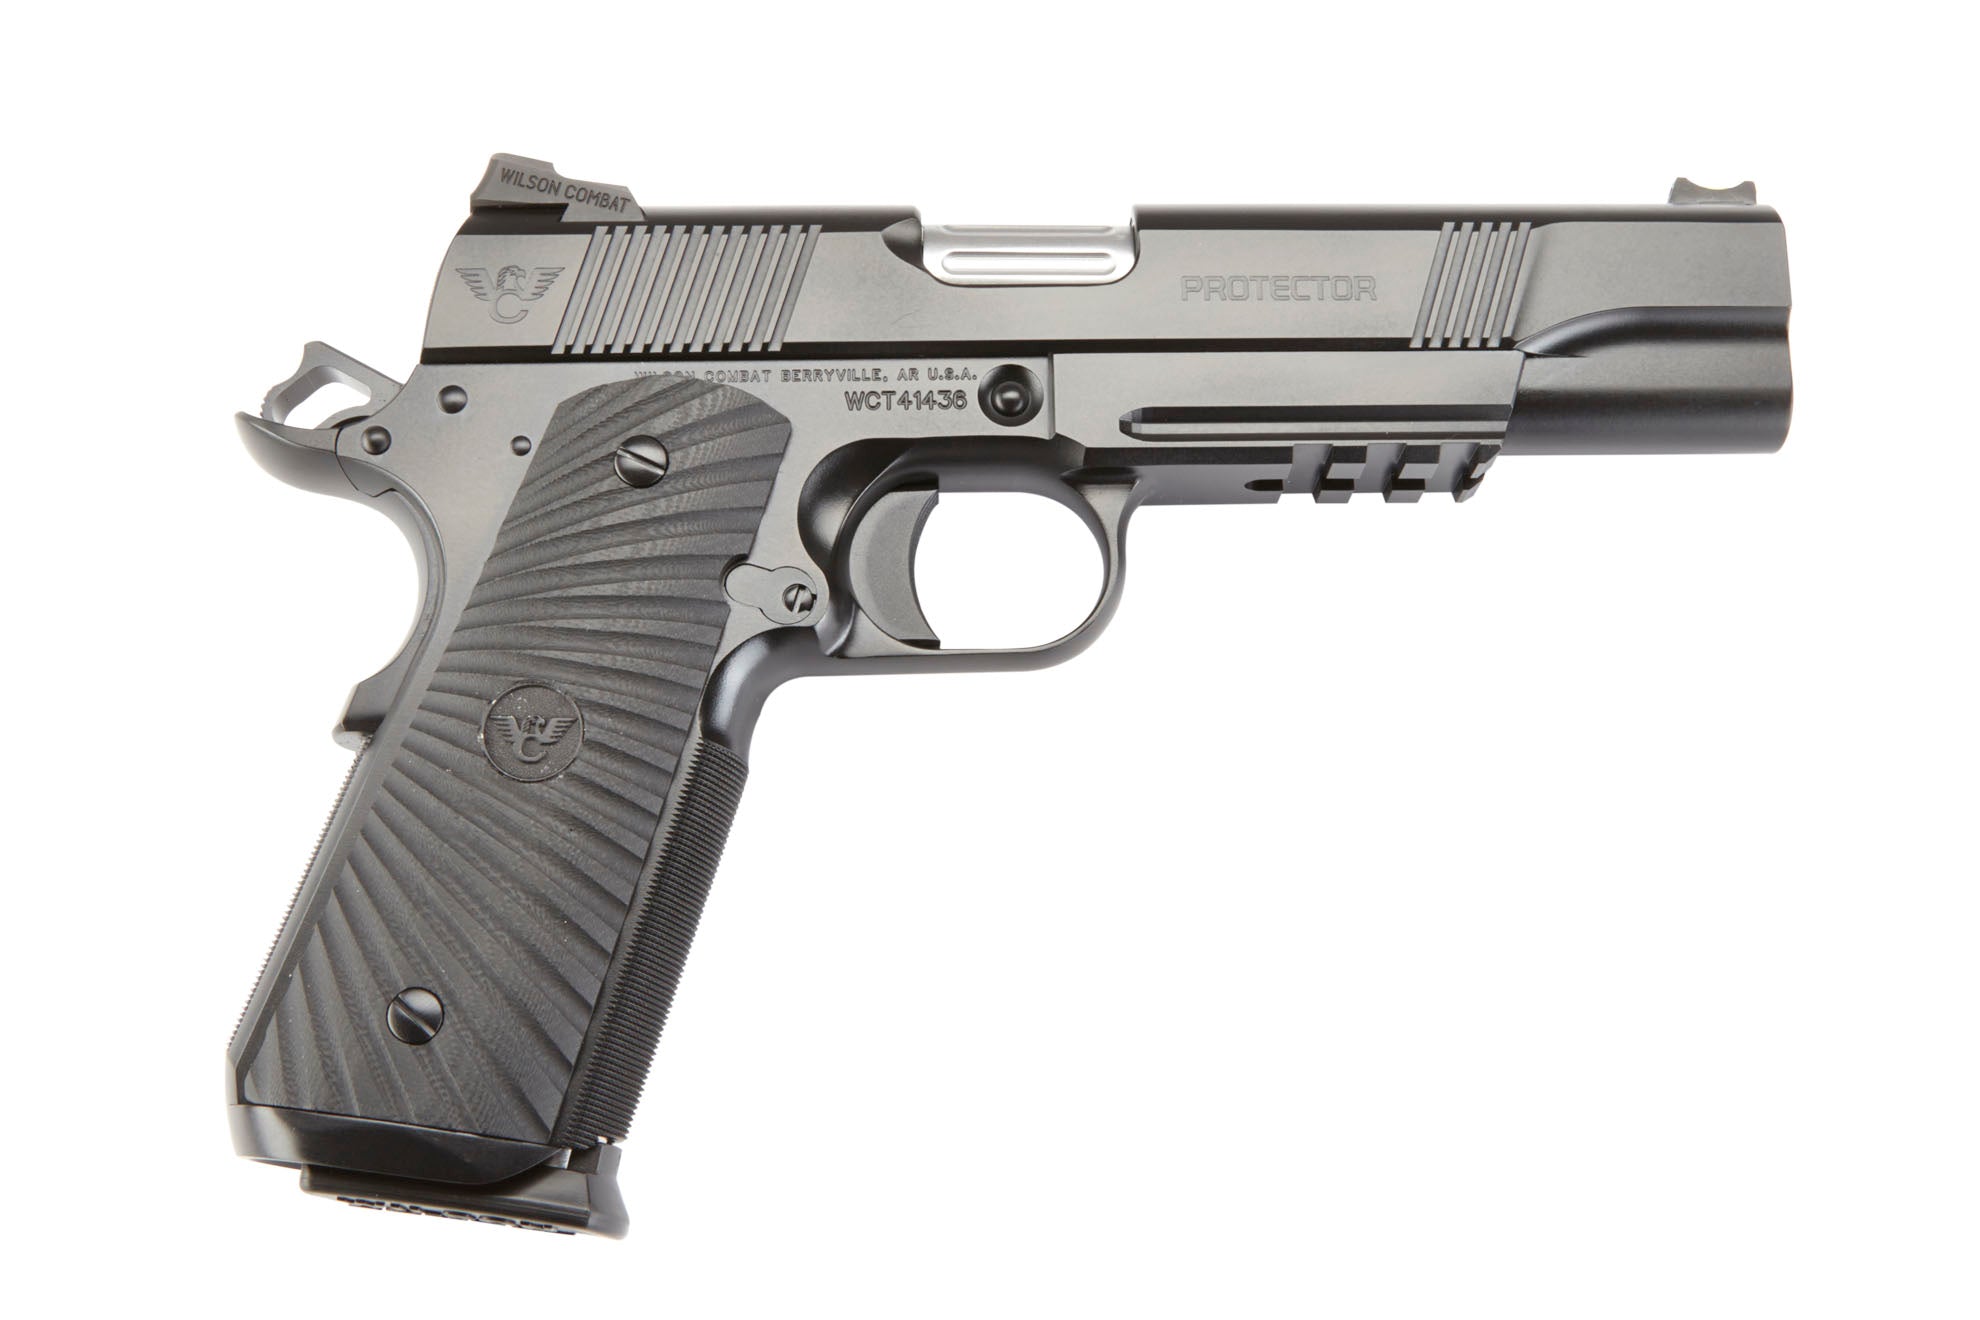 Wilson Combat Protector Review: Pros and cons of the Protector